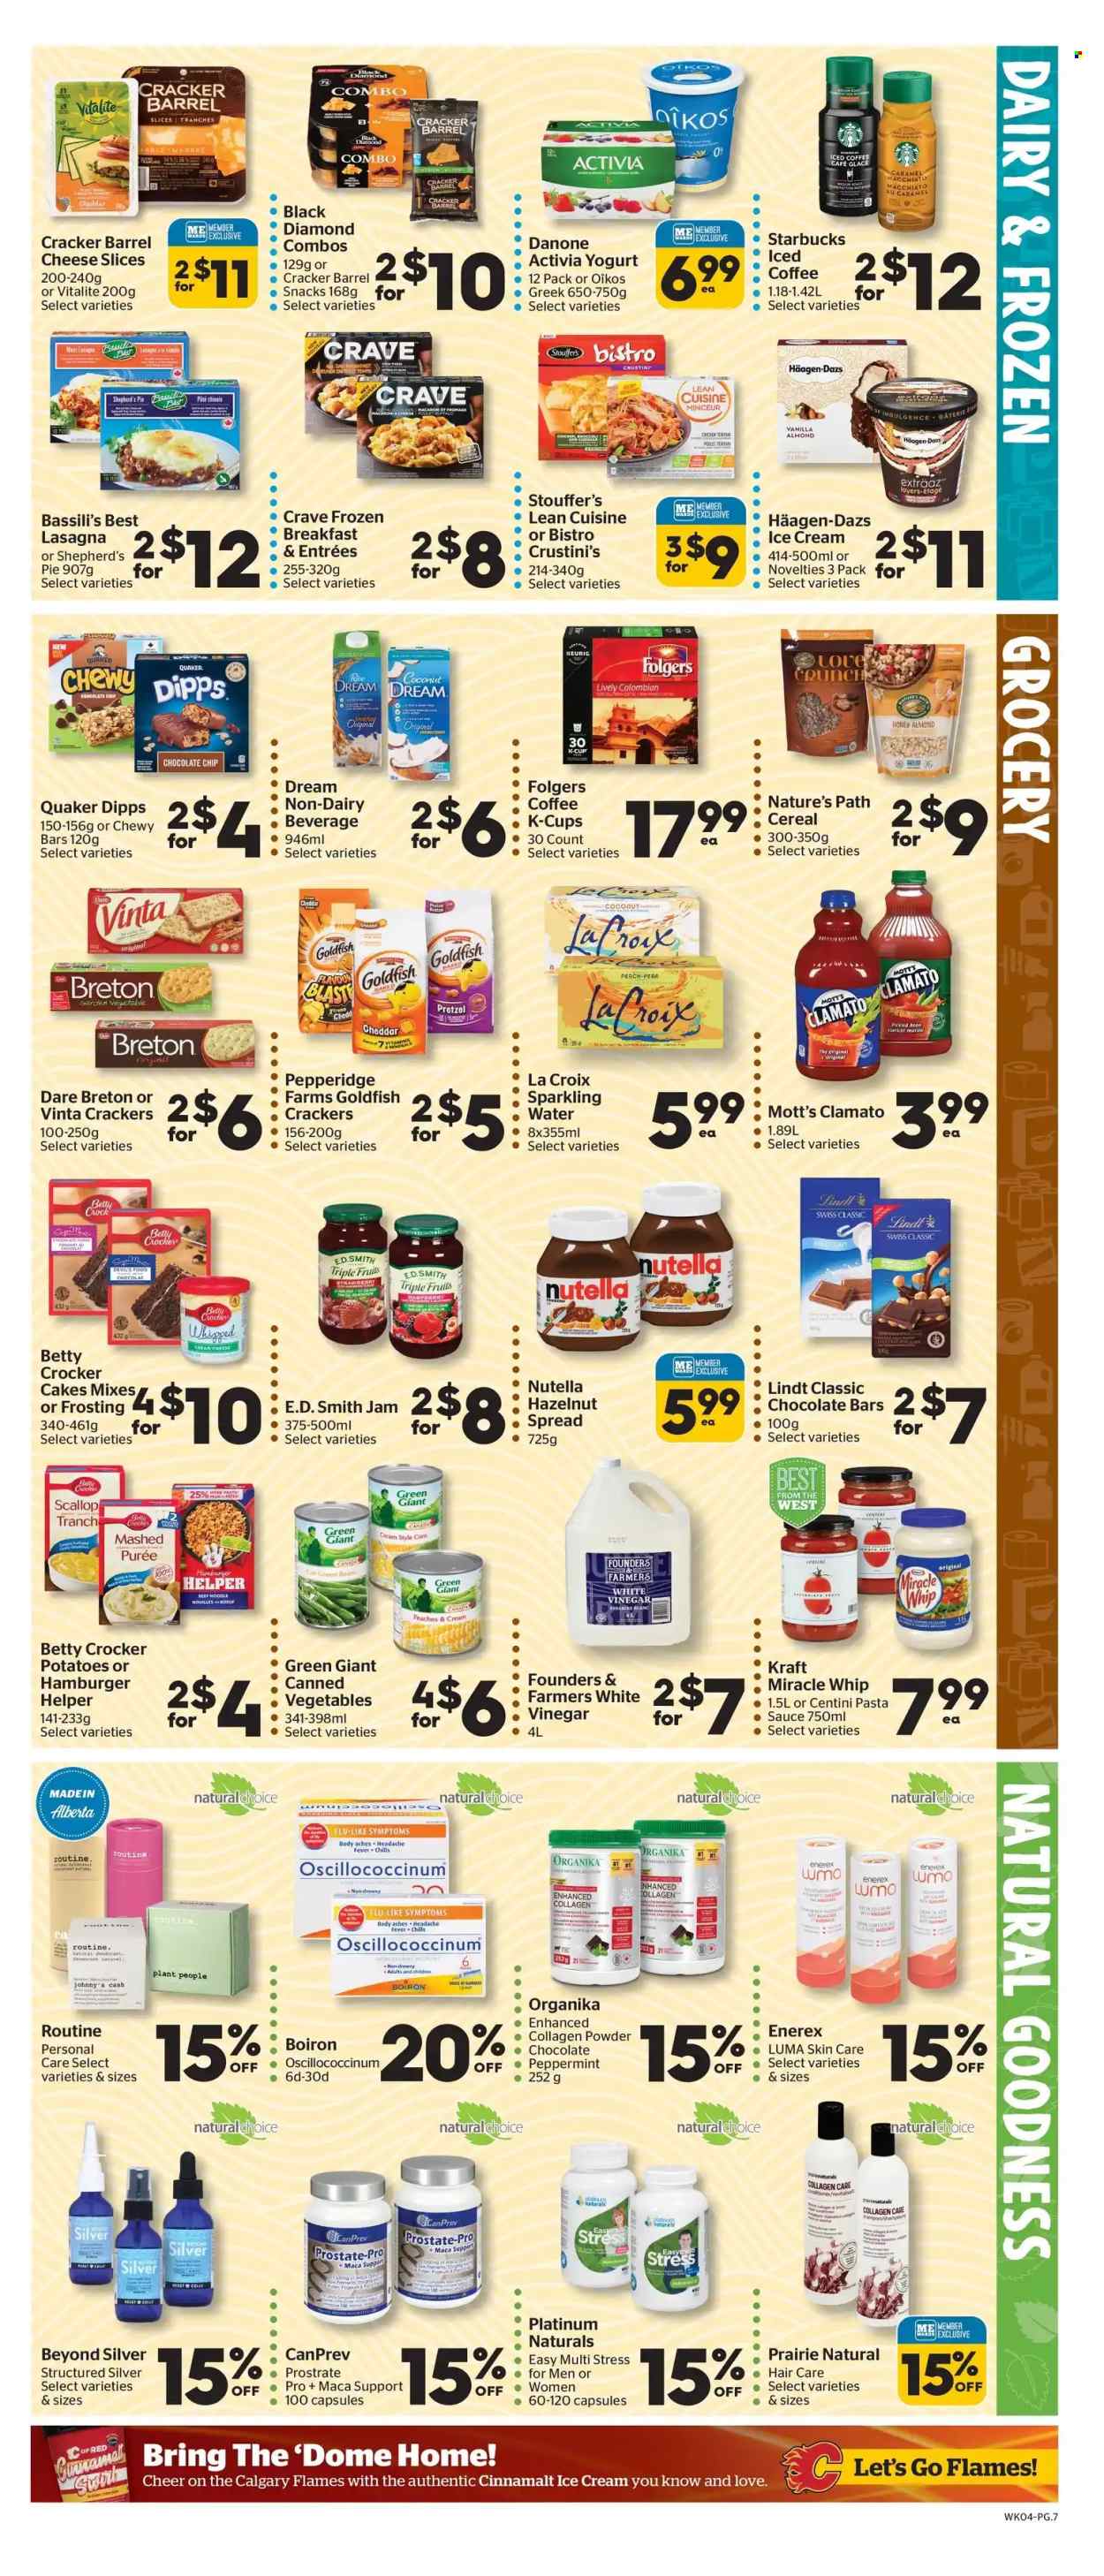 thumbnail - Calgary Co-op Flyer - November 24, 2022 - November 30, 2022 - Sales products - pretzels, cake, pie, green beans, potatoes, pears, coconut, peaches, Mott's, scallops, perch, pasta sauce, sauce, Quaker, noodles, lasagna meal, Lean Cuisine, Kraft®, sliced cheese, cheese, yoghurt, Activia, Oikos, whipped cream, Miracle Whip, ice cream, Häagen-Dazs, Stouffer's, chocolate chips, snack, crackers, chocolate bar, Goldfish, frosting, cereals, caramel, vinegar, fruit jam, hazelnut spread, Clamato, sparkling water, iced coffee, Folgers, coffee capsules, Starbucks, K-Cups, Keurig, conditioner, anti-perspirant, Oscillococcinum, Boiron, Nutella, Danone, Lindt, deodorant. Page 10.